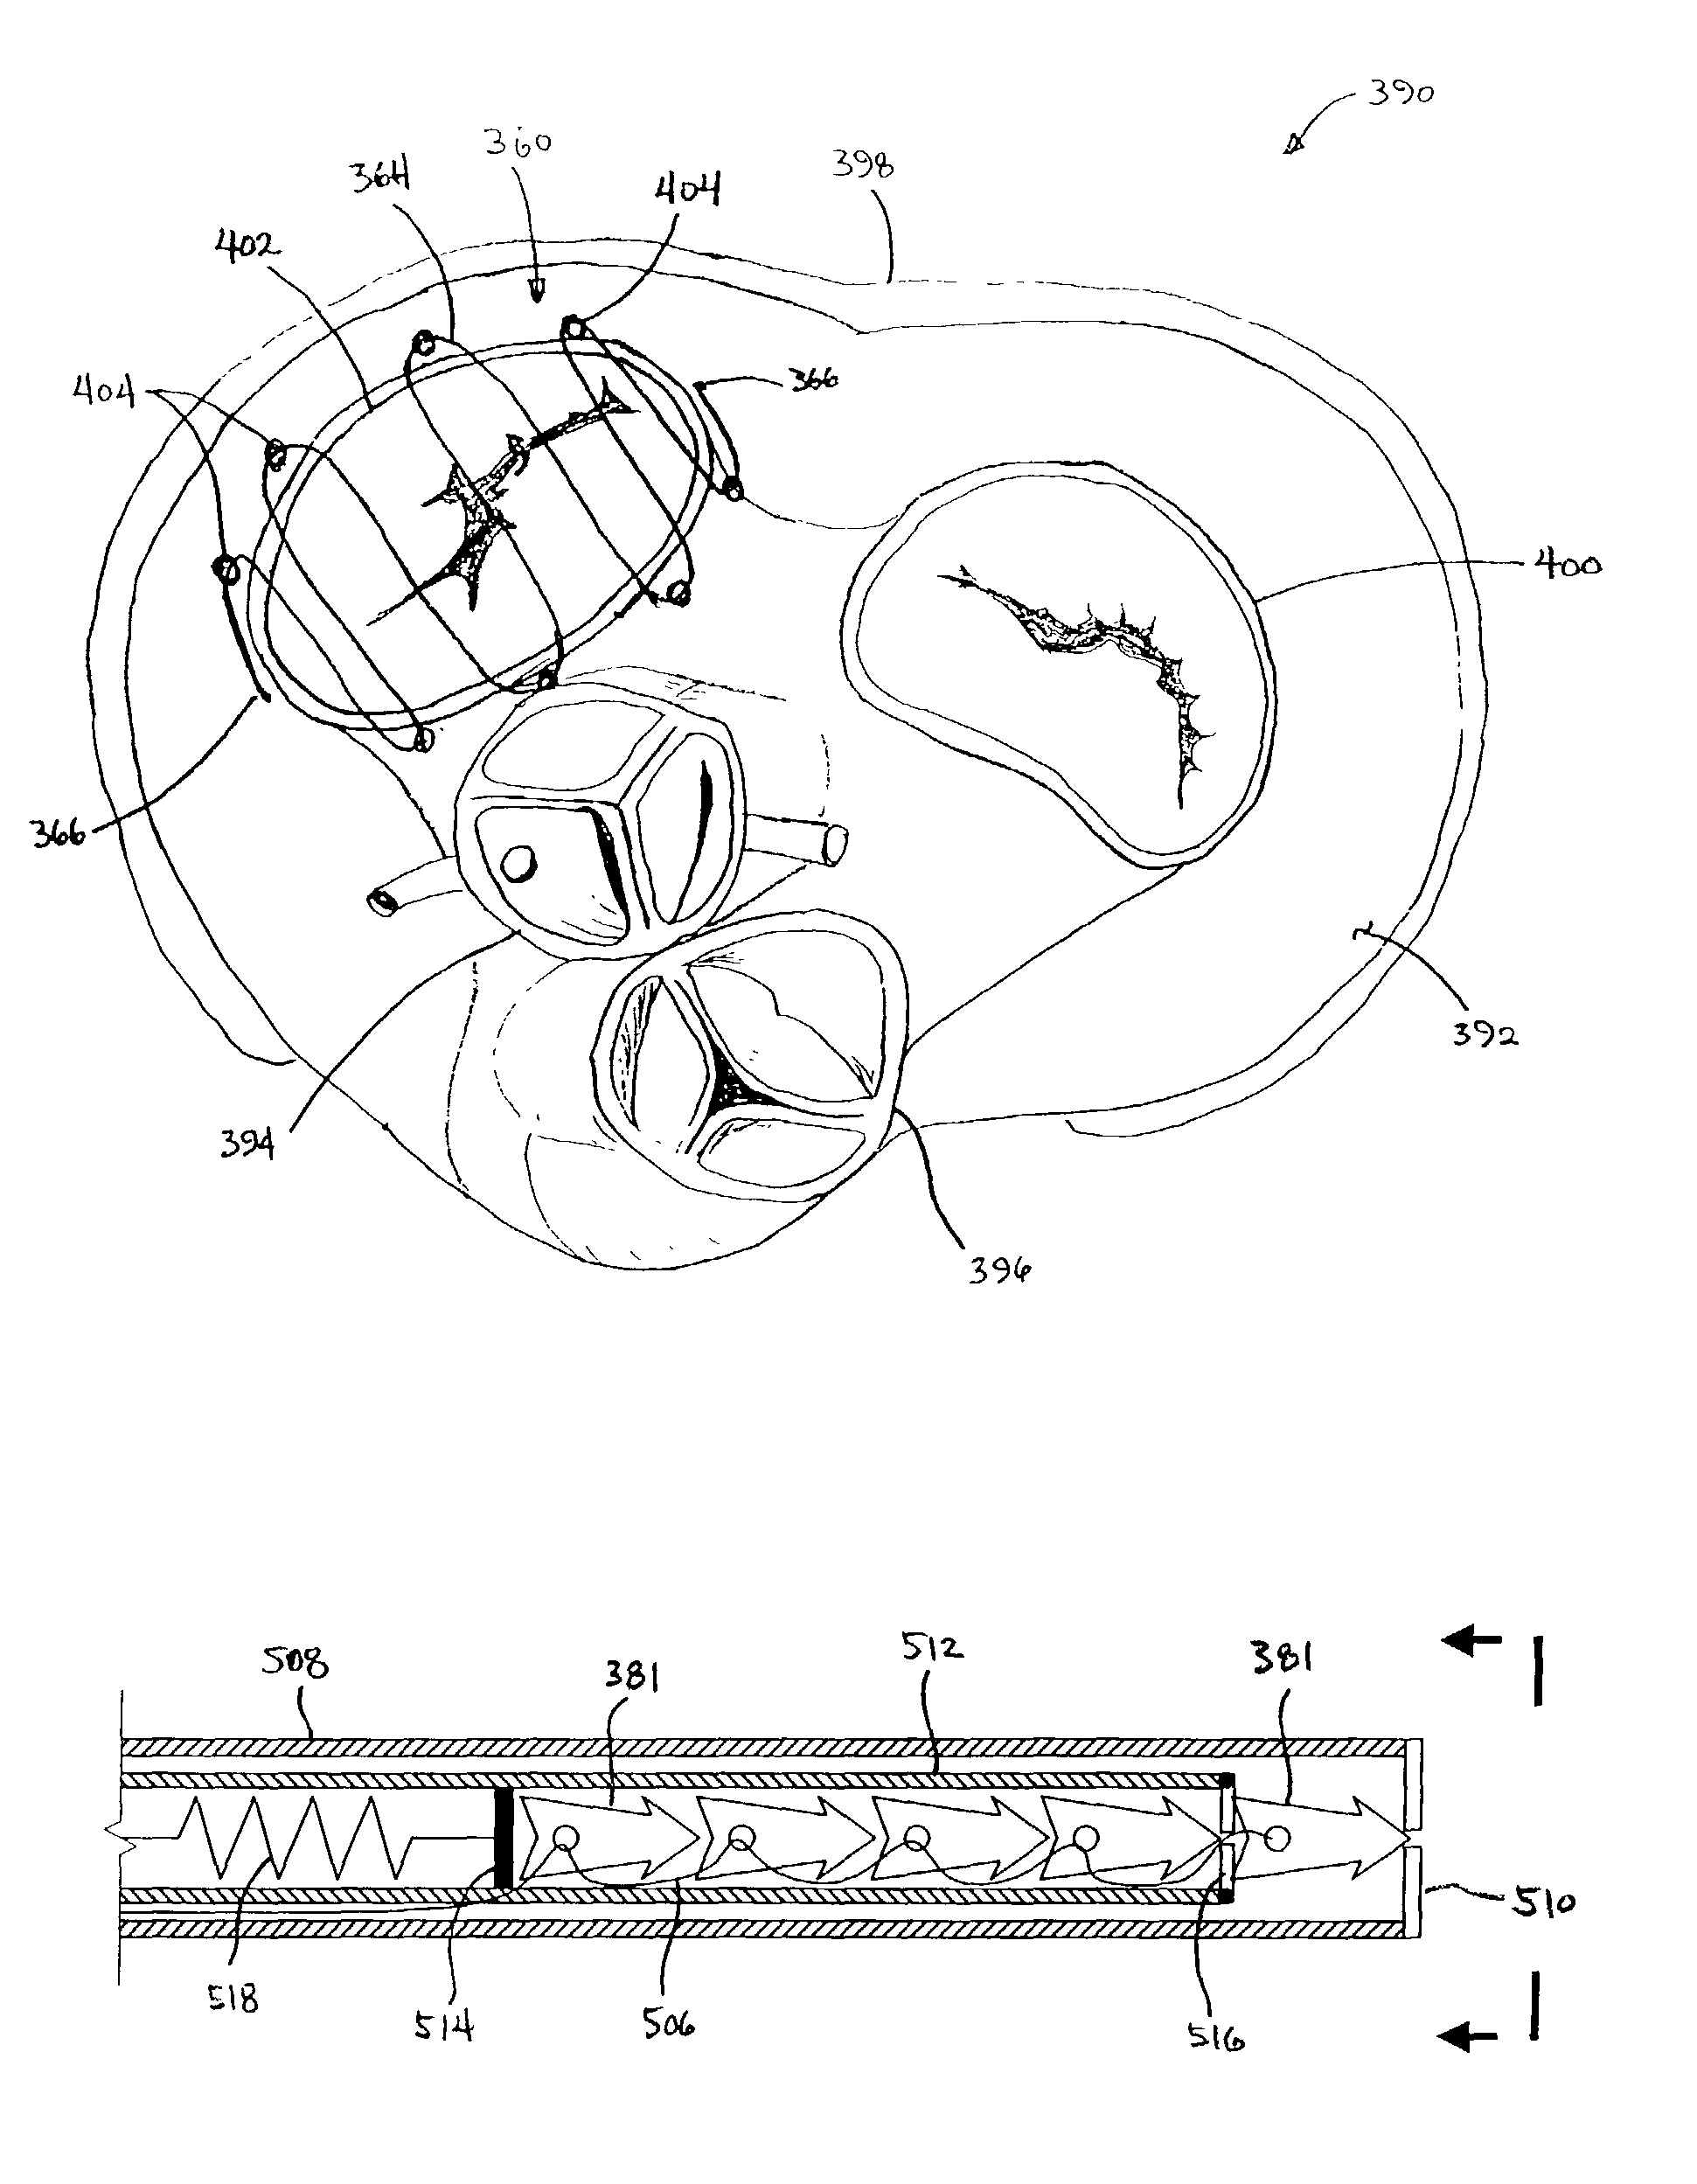 Apparatus and methods for treating tissue